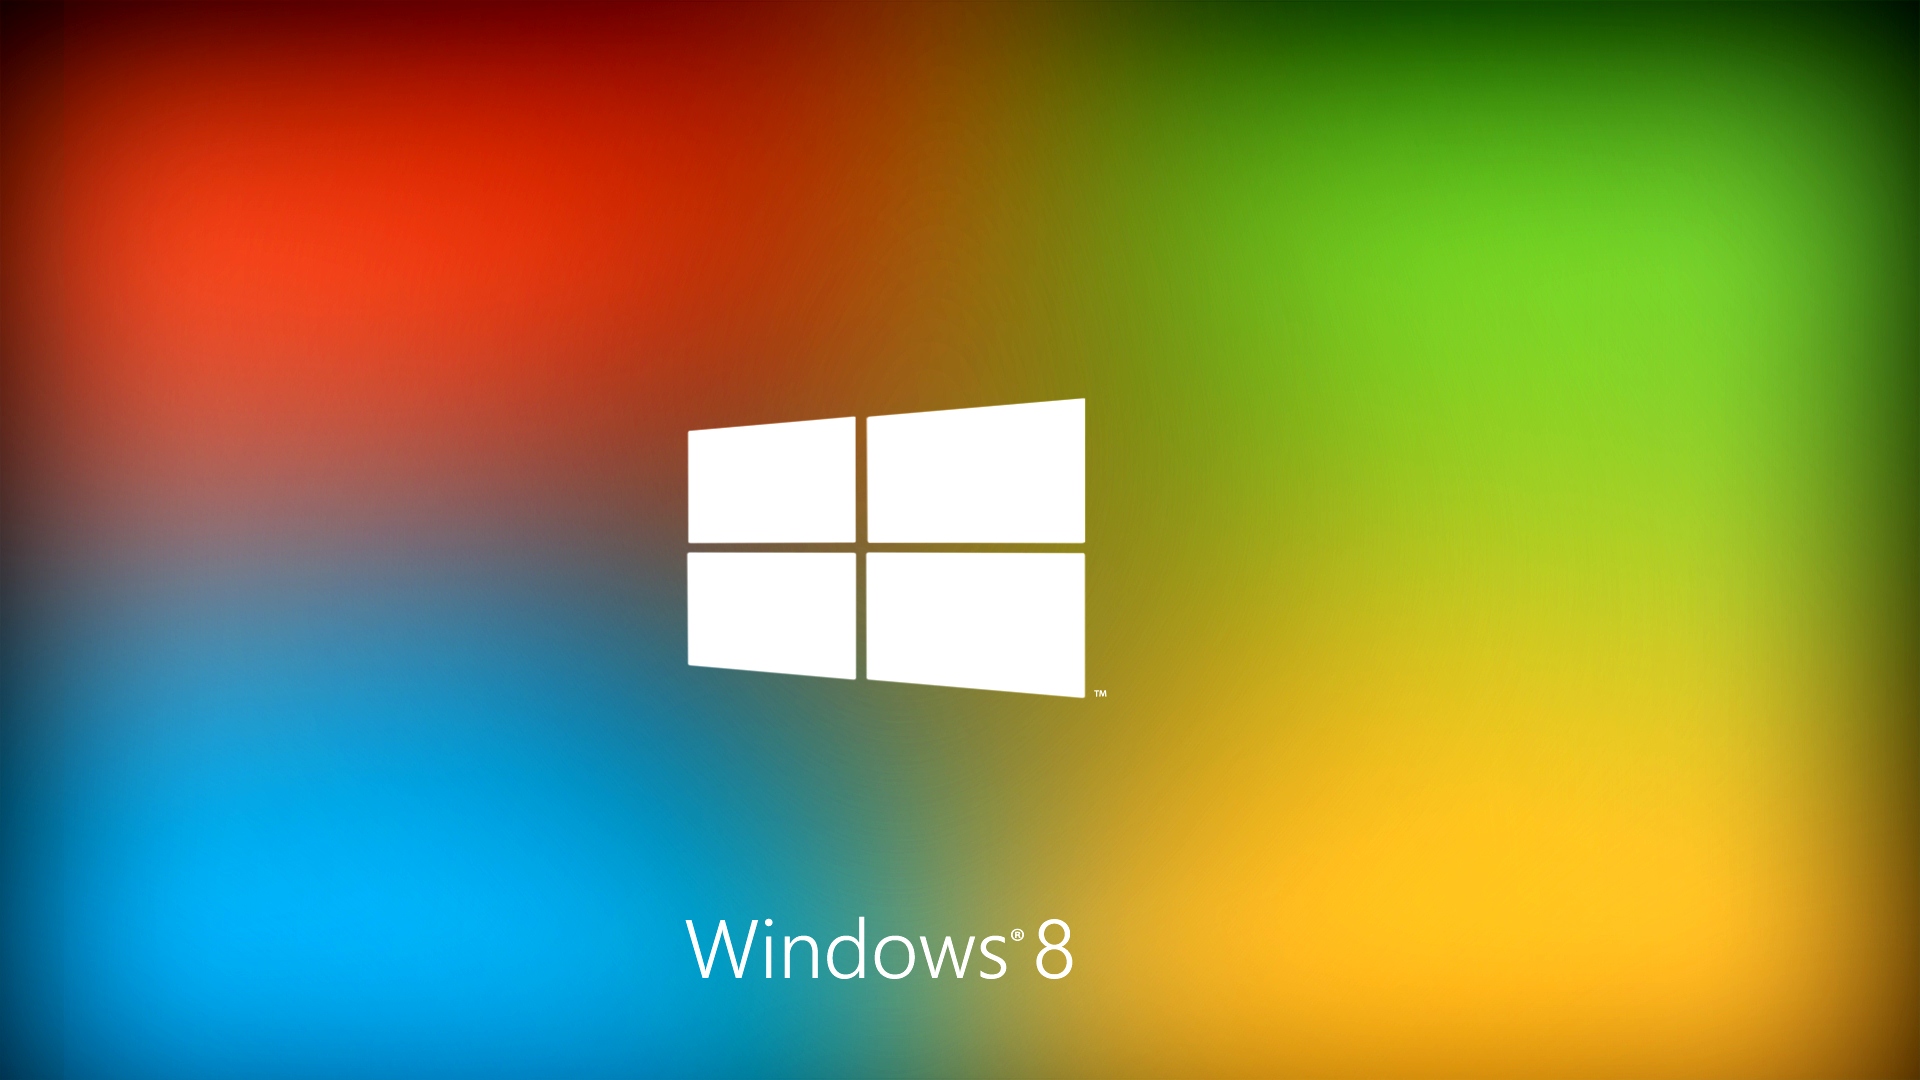 Best 10 WINDOWS 8 WALLPAPER HD Pictures - Image Gallery